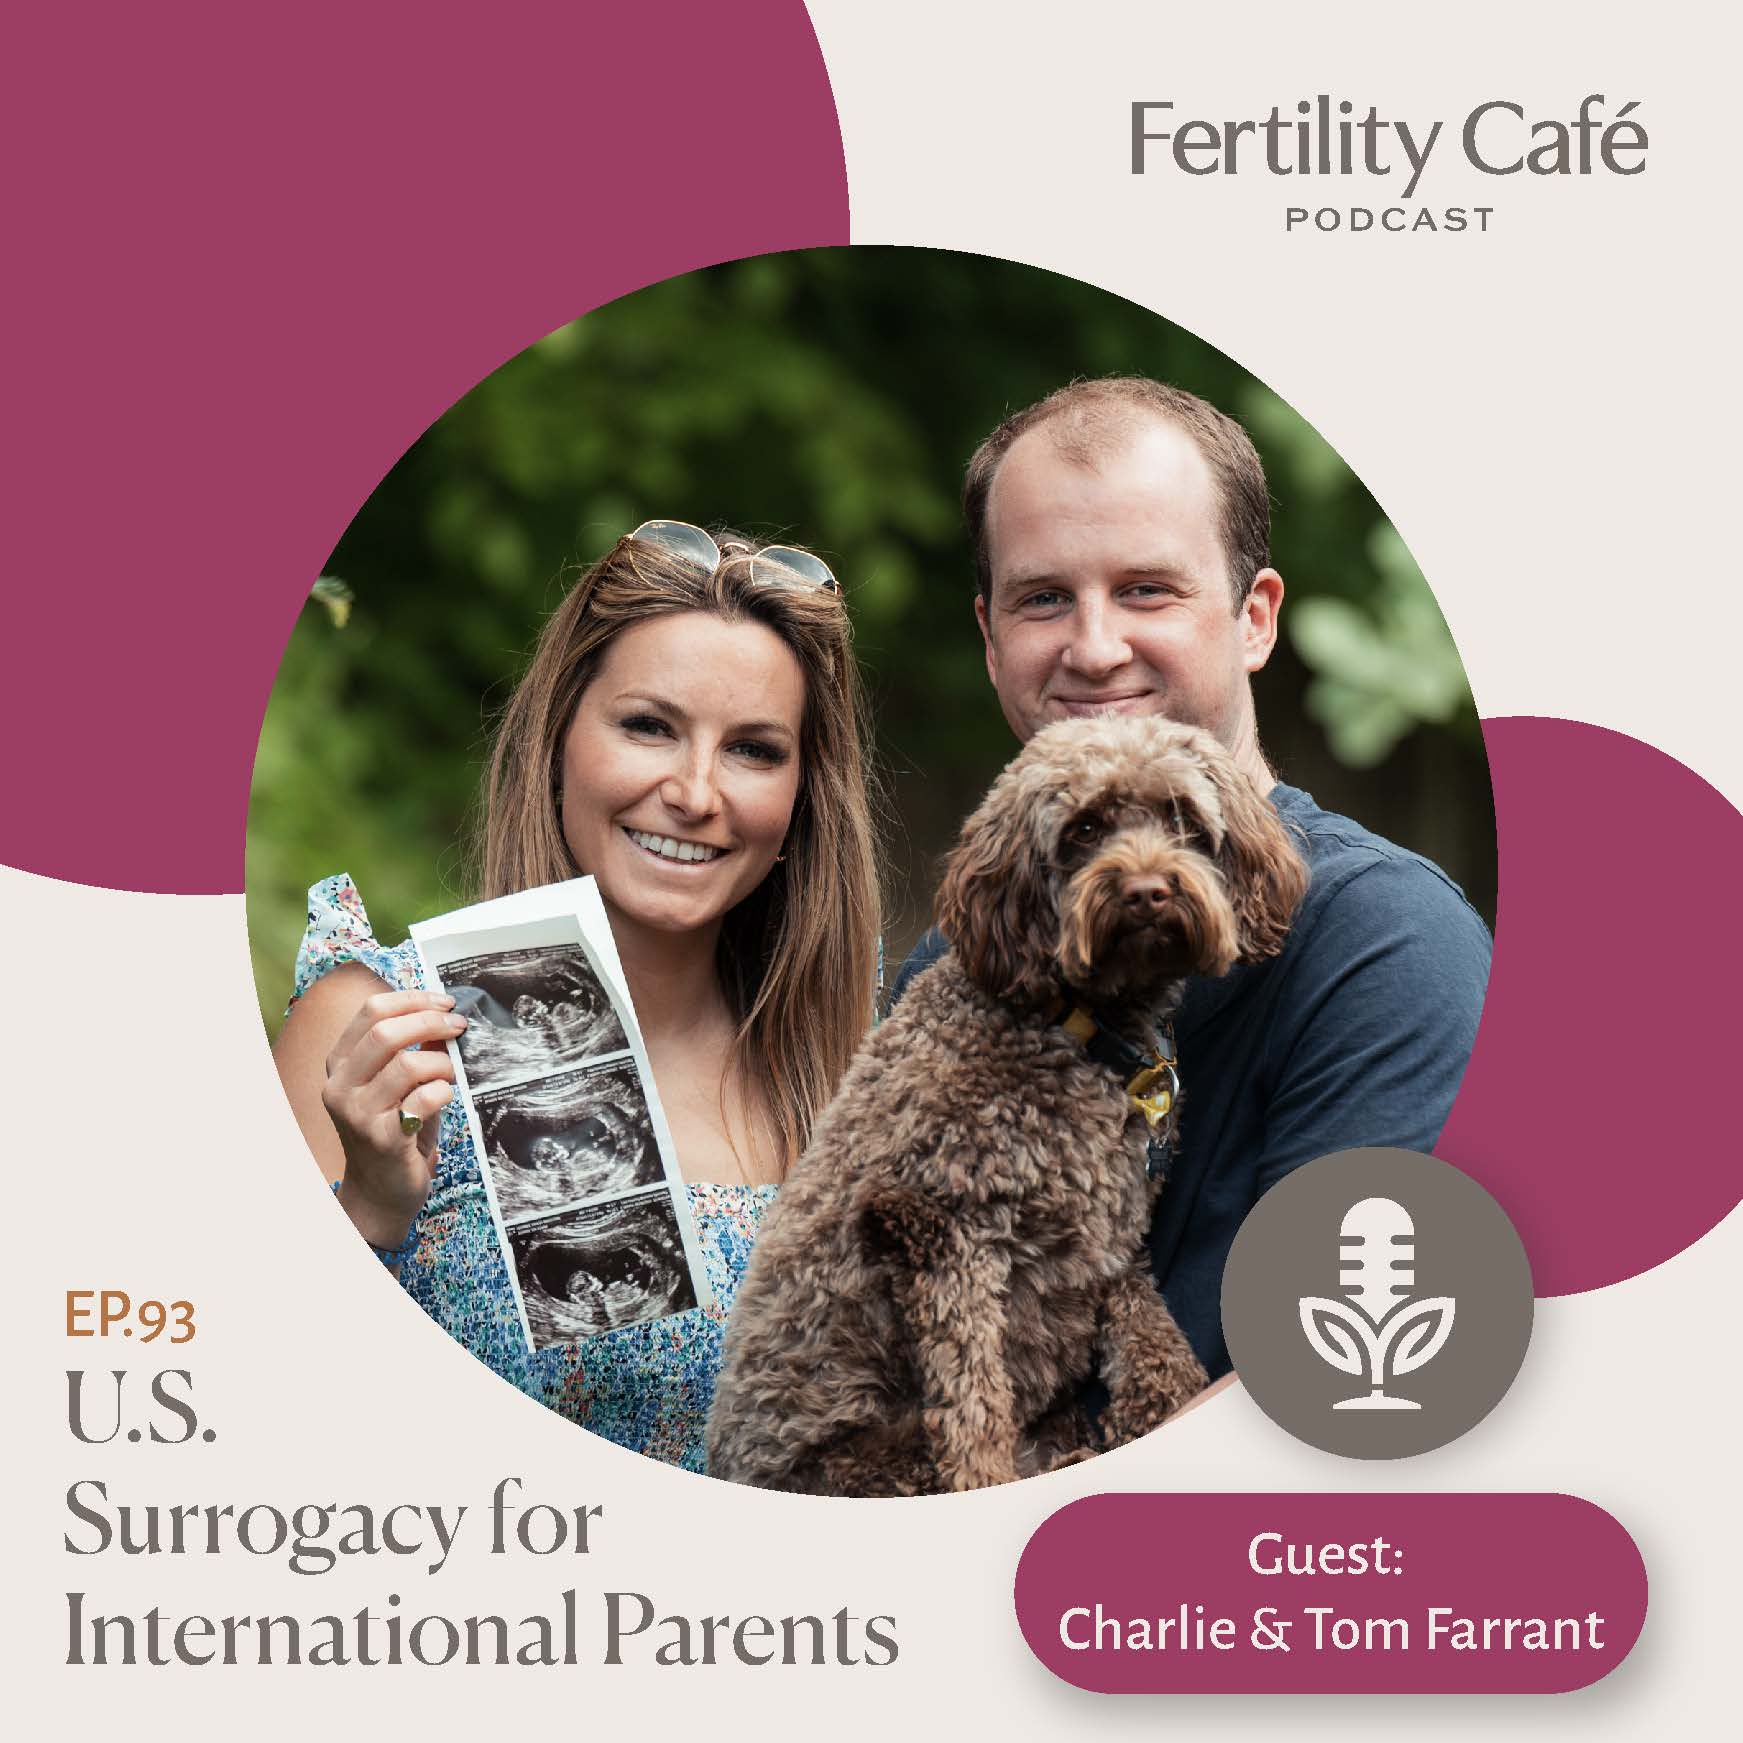 Ep 93 Transcript | U.S. Surrogacy for International Parents: Charlie and Tom Farrant Tell Their Story